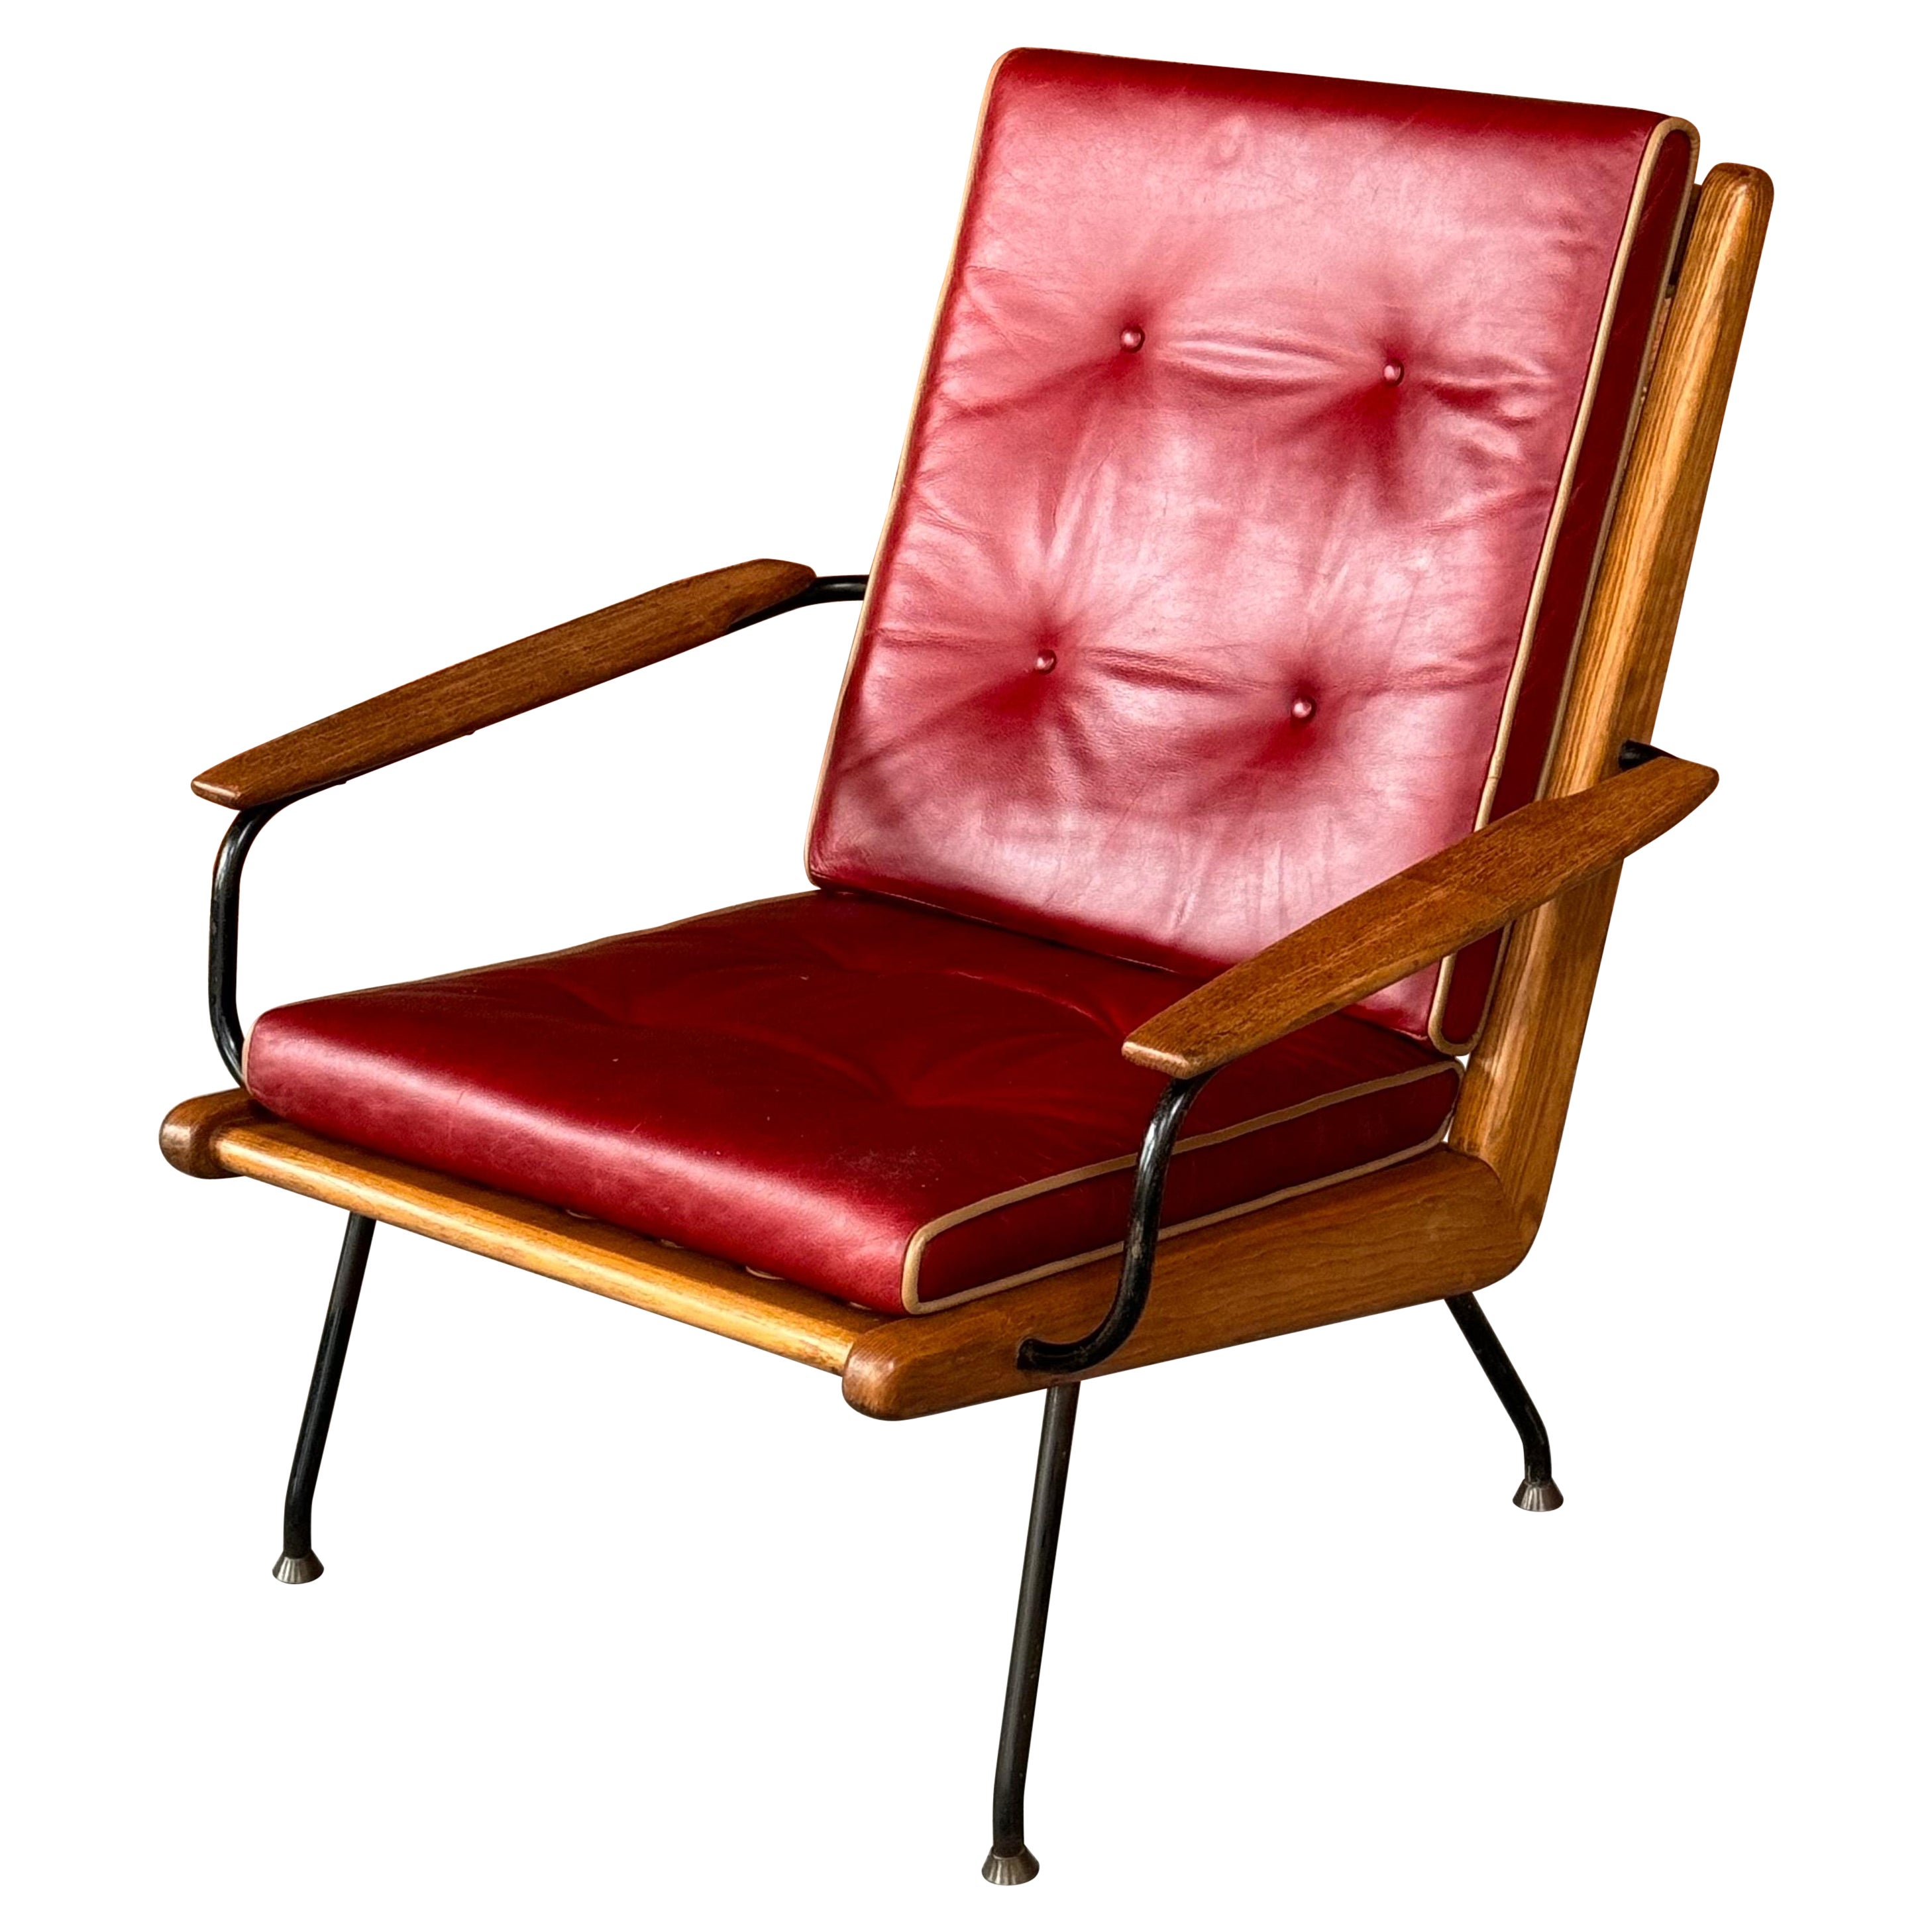 1950s European Armchair in the style of Jean Prouve For Sale